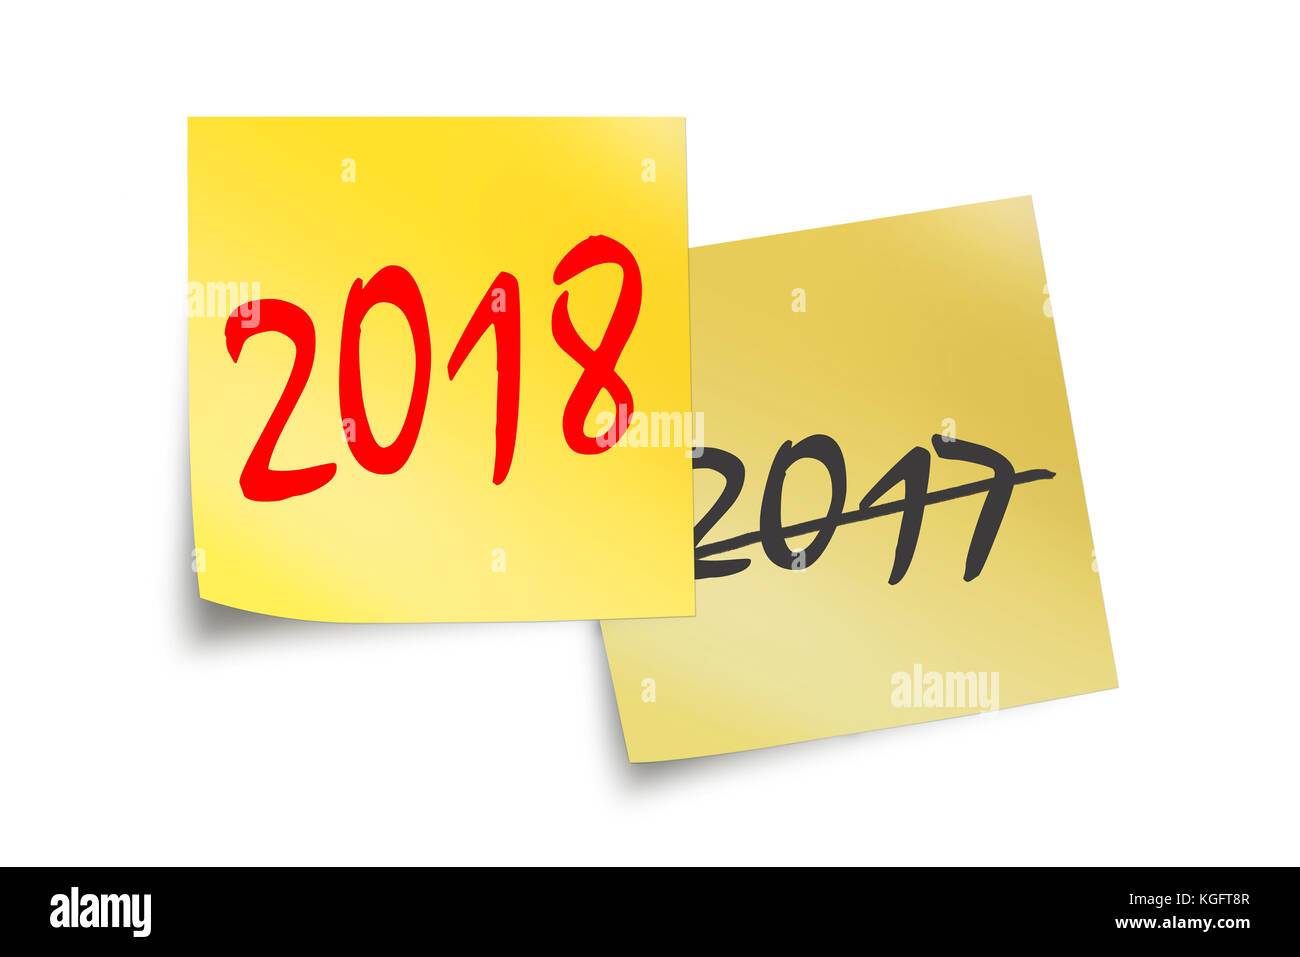 2018 and 2017 written on yellow sticky notes isolated on white Stock Photo